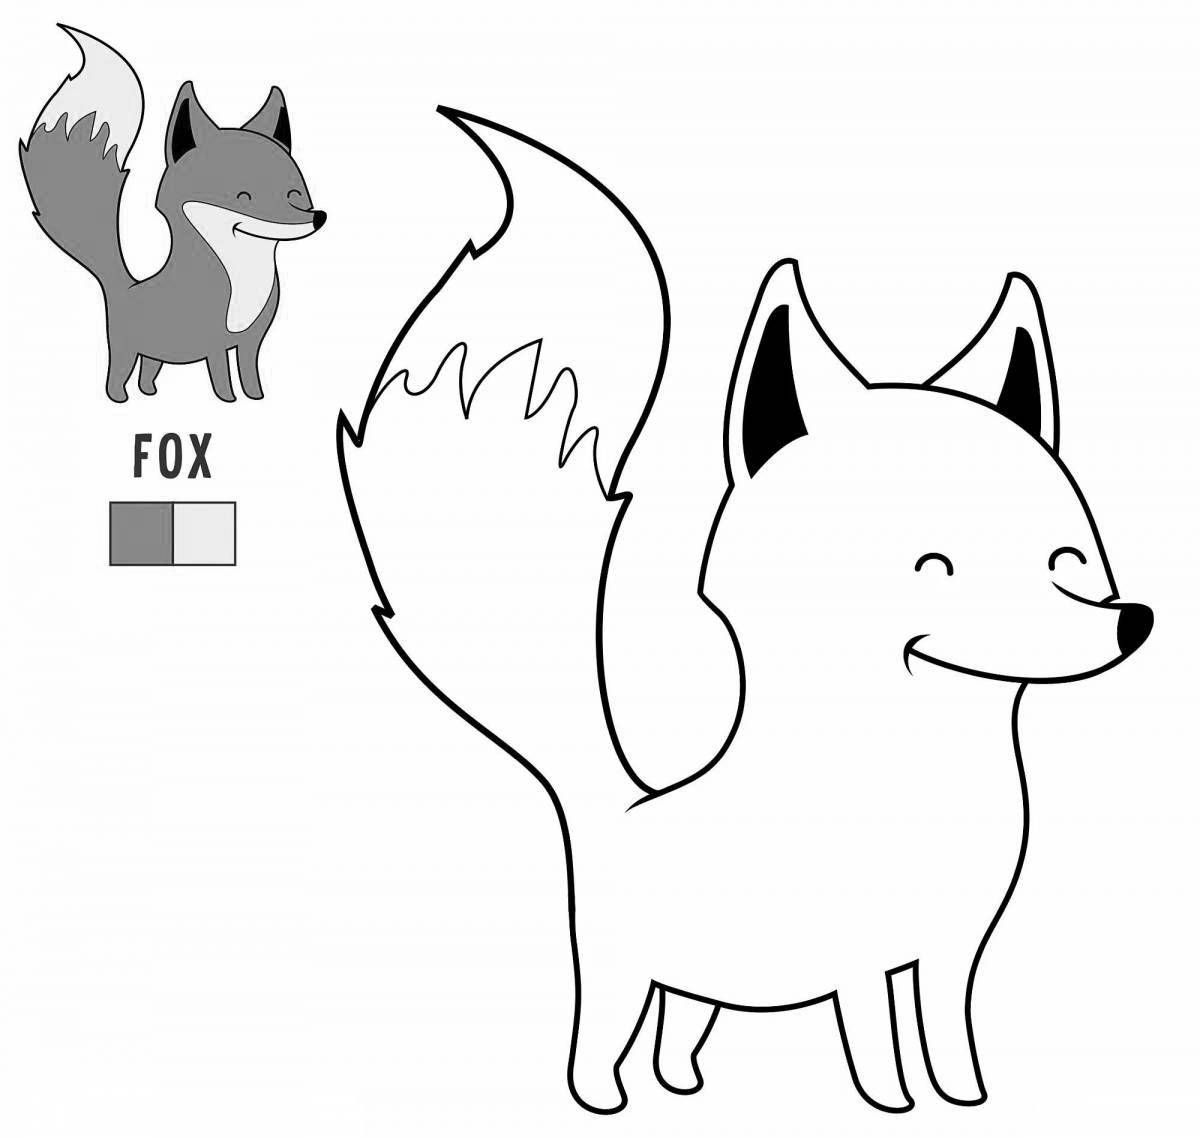 Delightful drawing of a fox